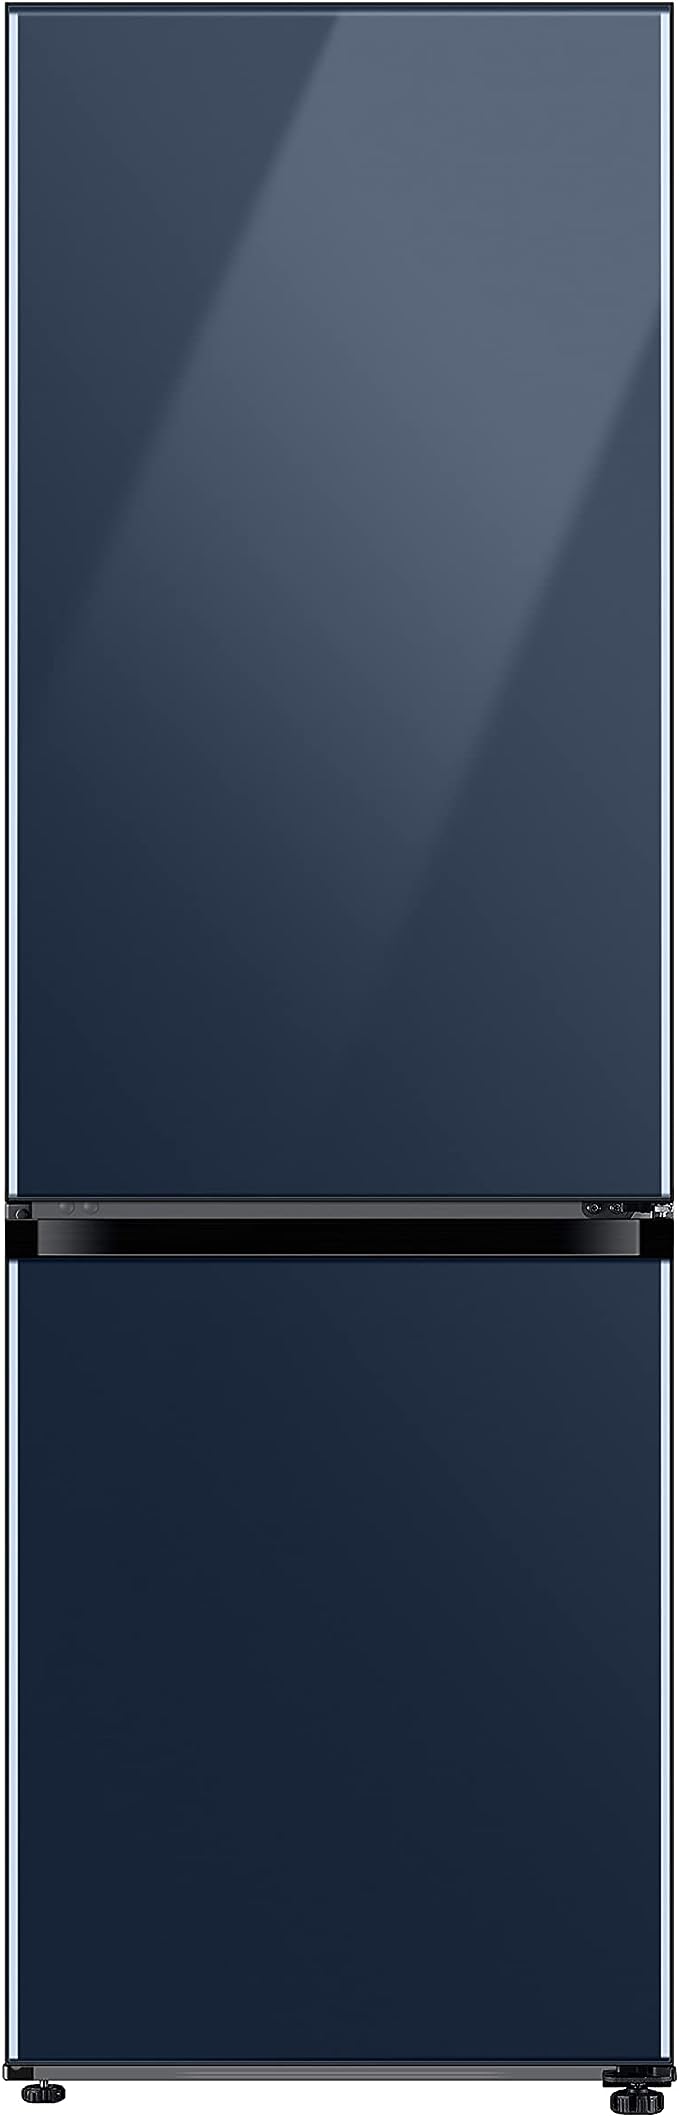 Samsung BESPOKE Compact Refrigerator with Flexible Design and Even Cooling